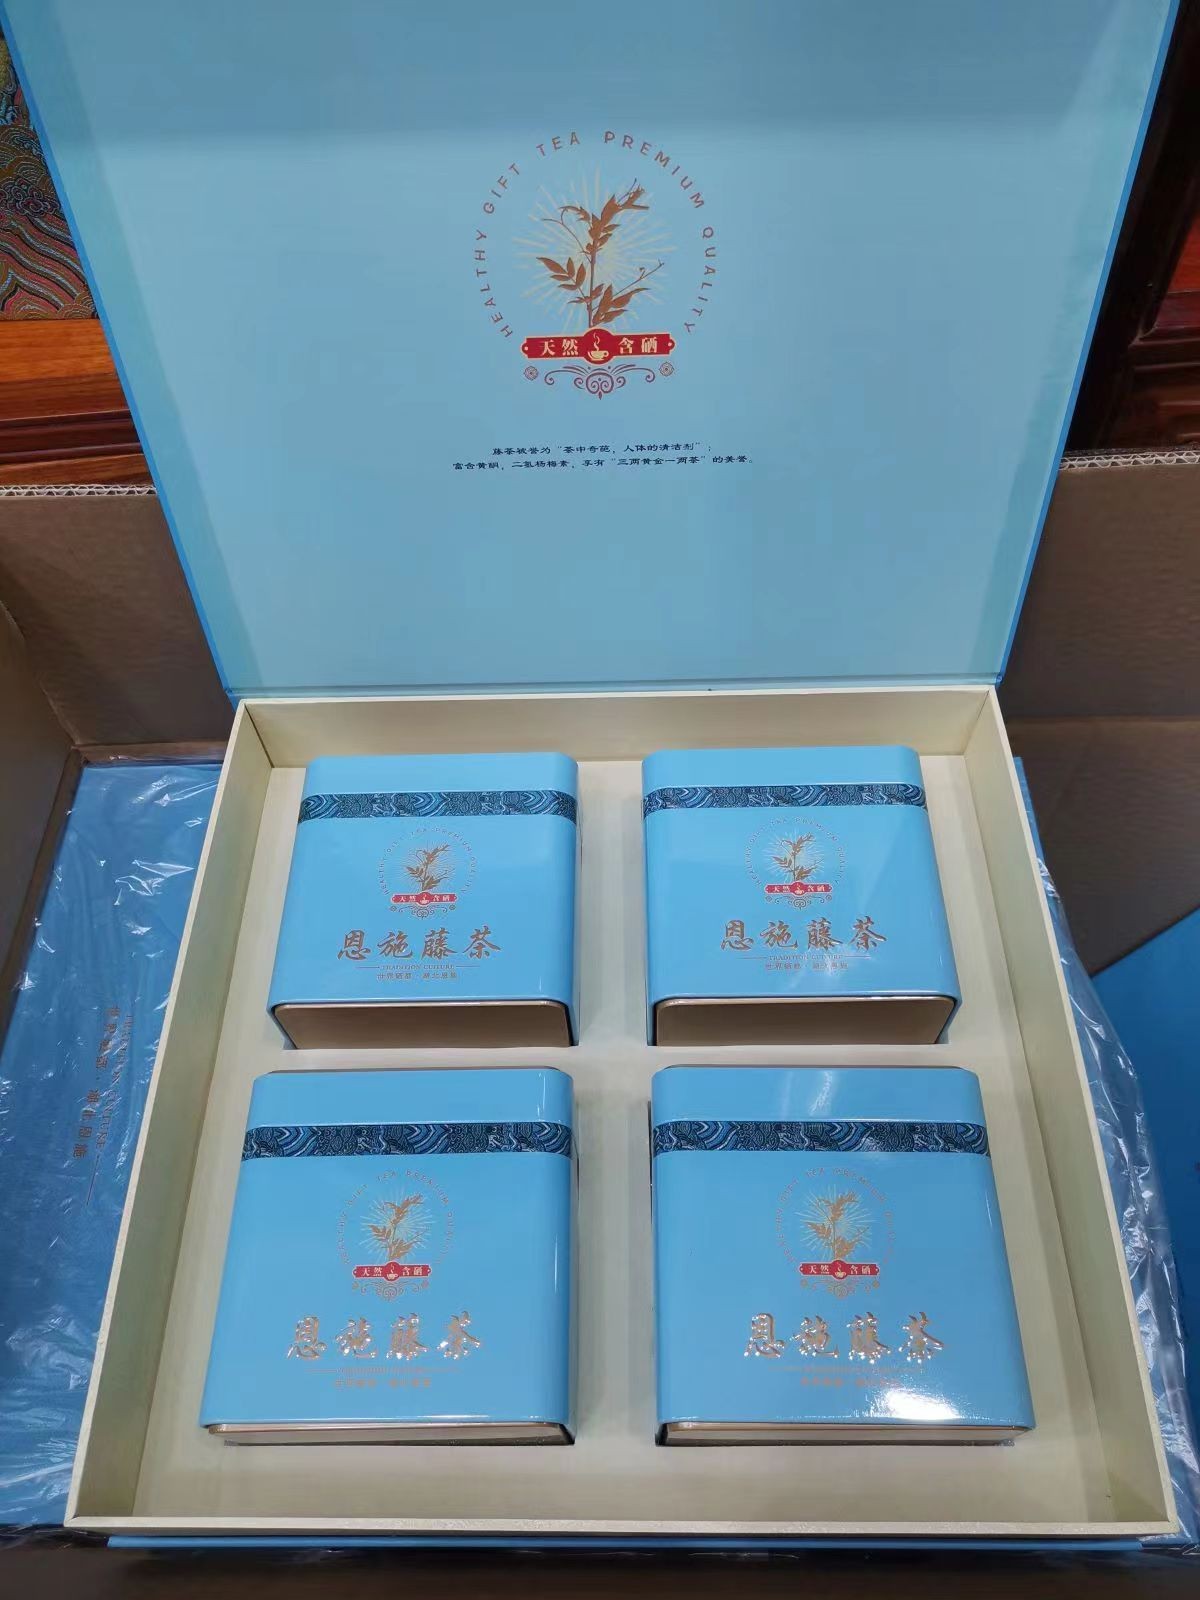 New Box Gift Set Vine Tea White Tea Fancy Gift Set for Gifts and surprise Bulk wholesale china